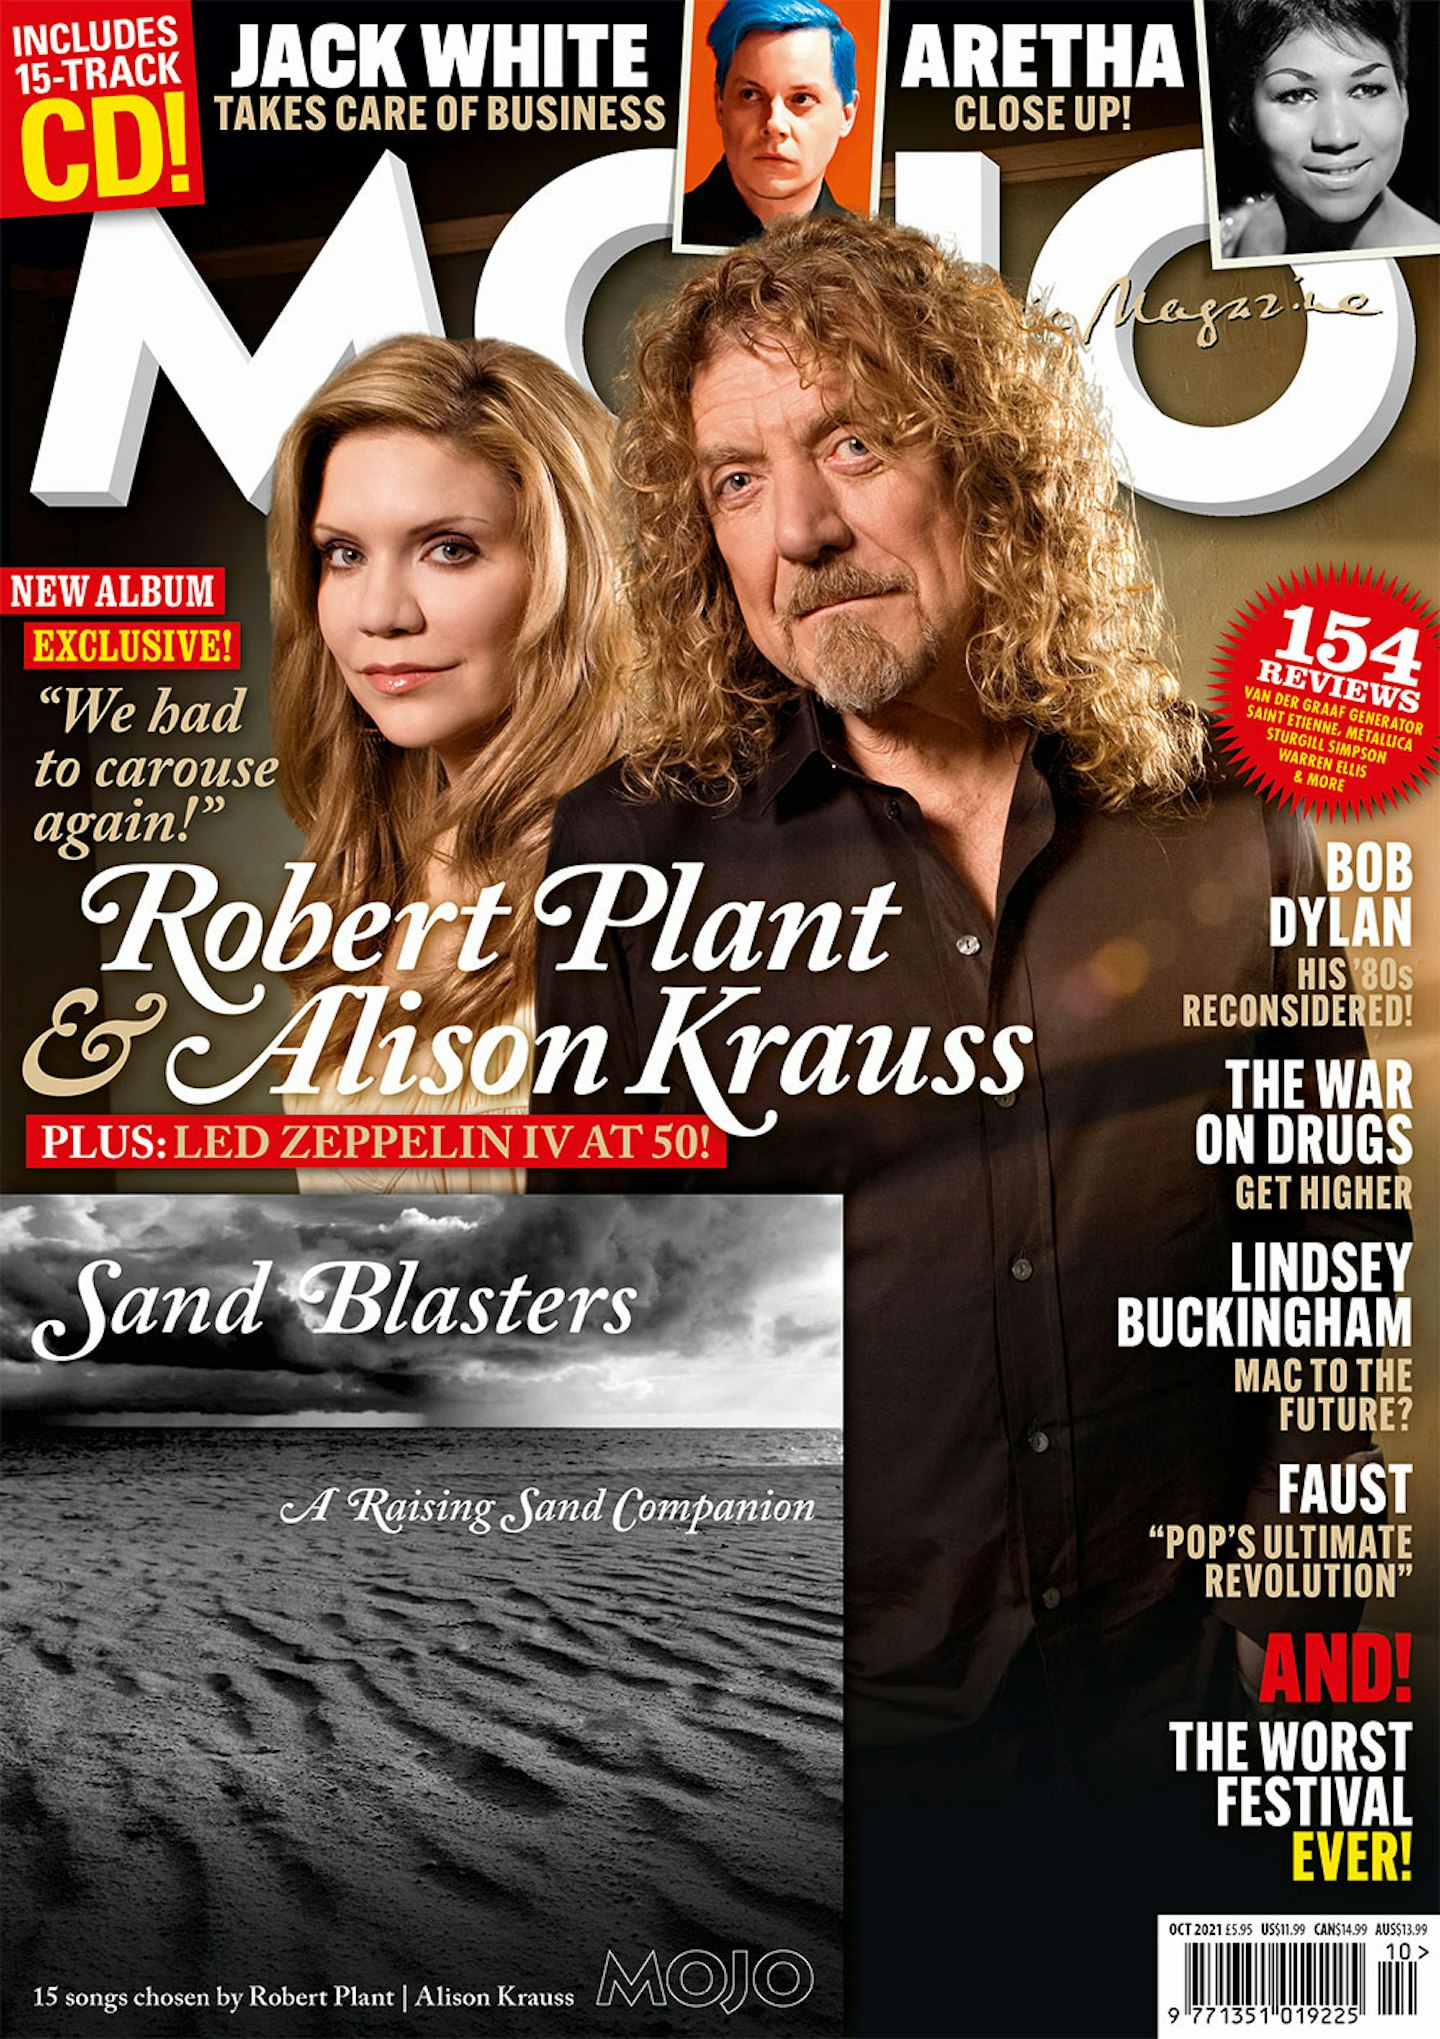 MOJO 335 cover, featuring Robert Plant and Alison Krauss.